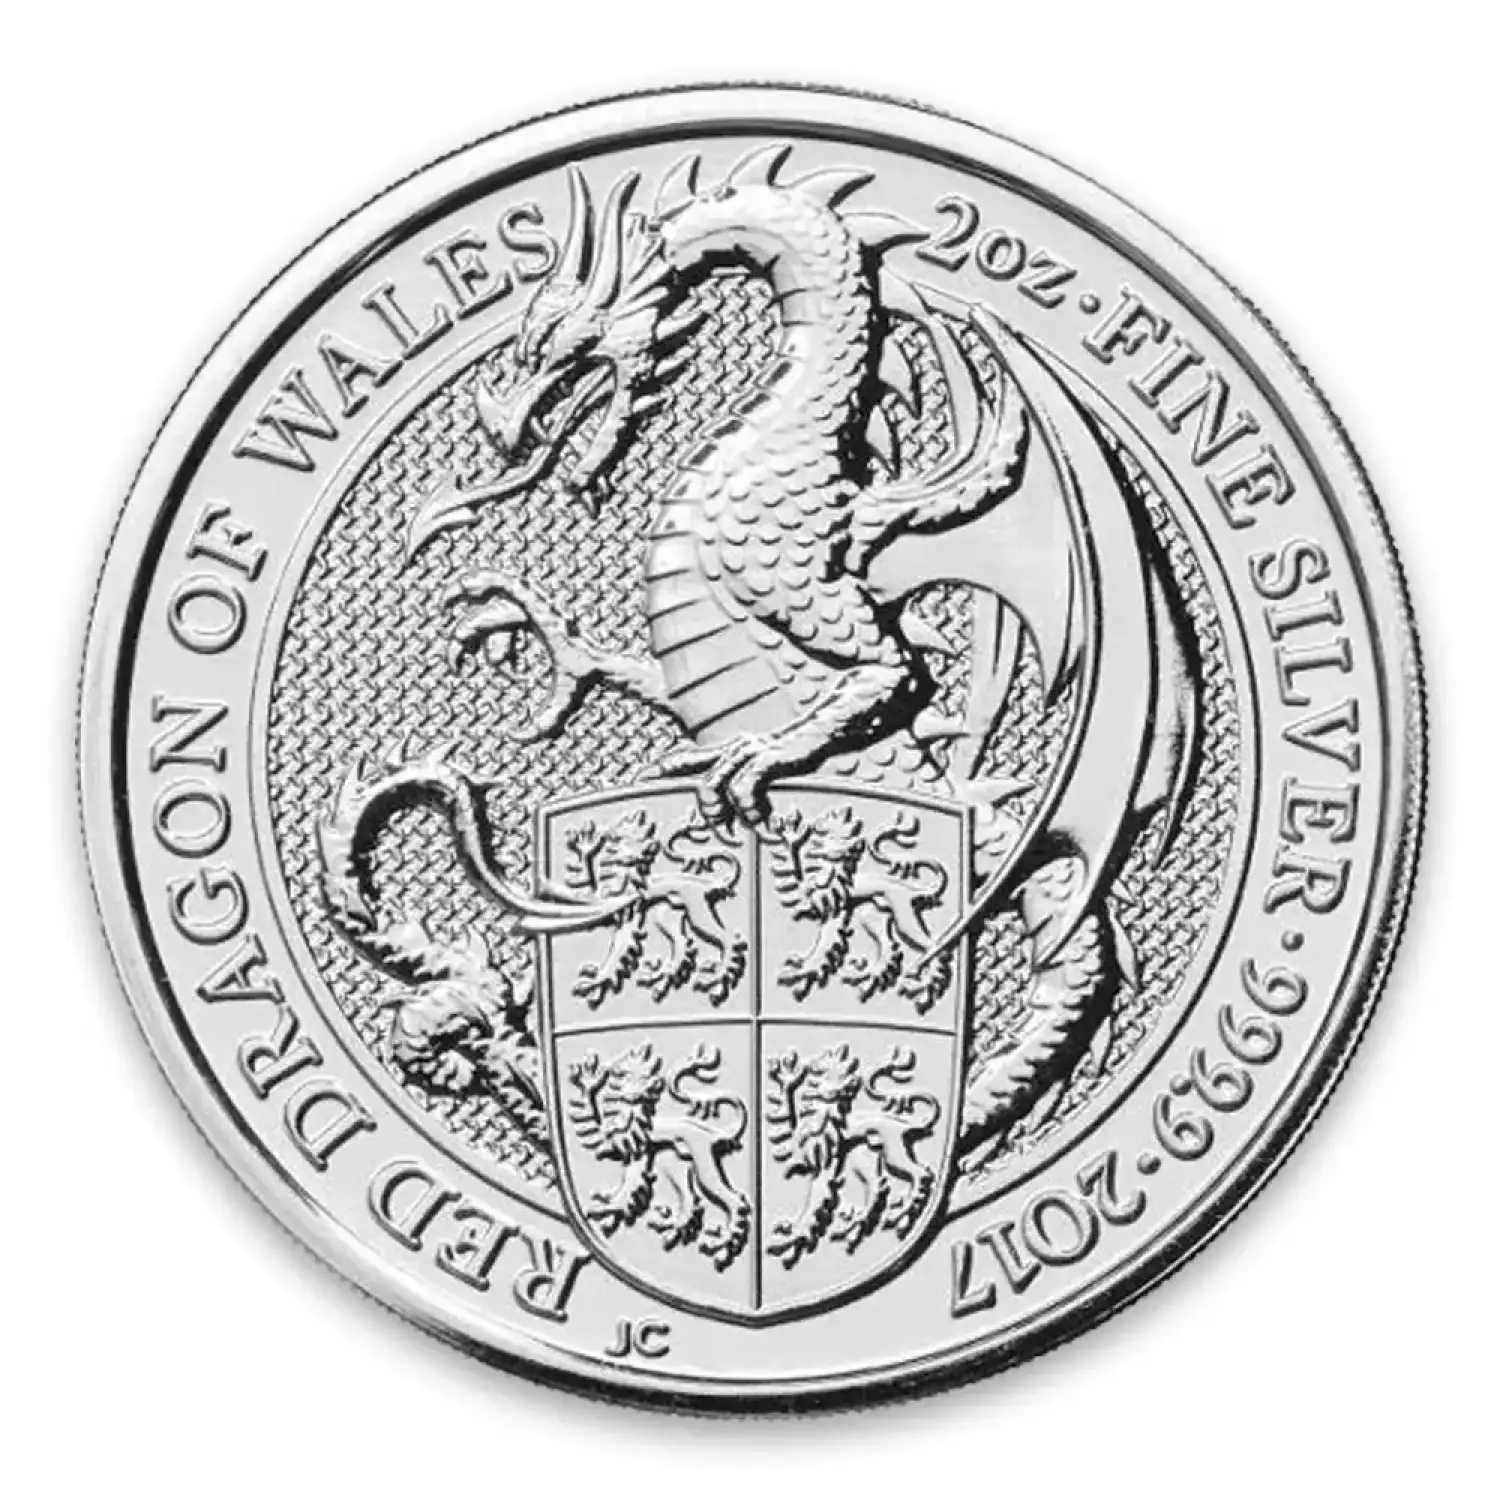 2017 2oz Britain Queen's Beasts: The Dragon (2)